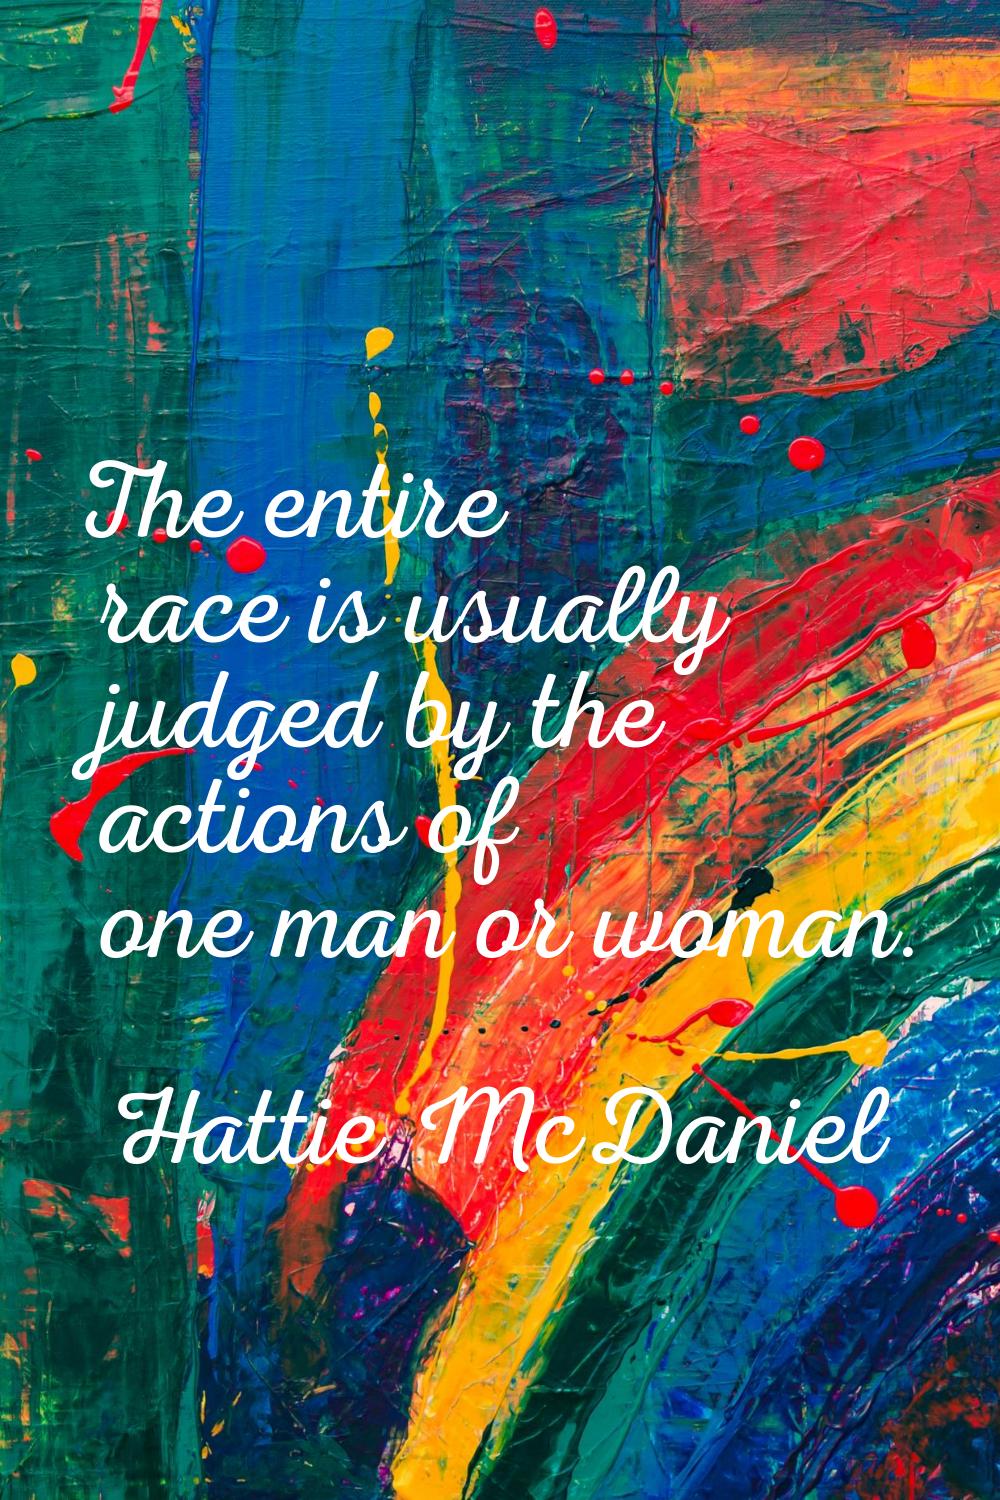 The entire race is usually judged by the actions of one man or woman.